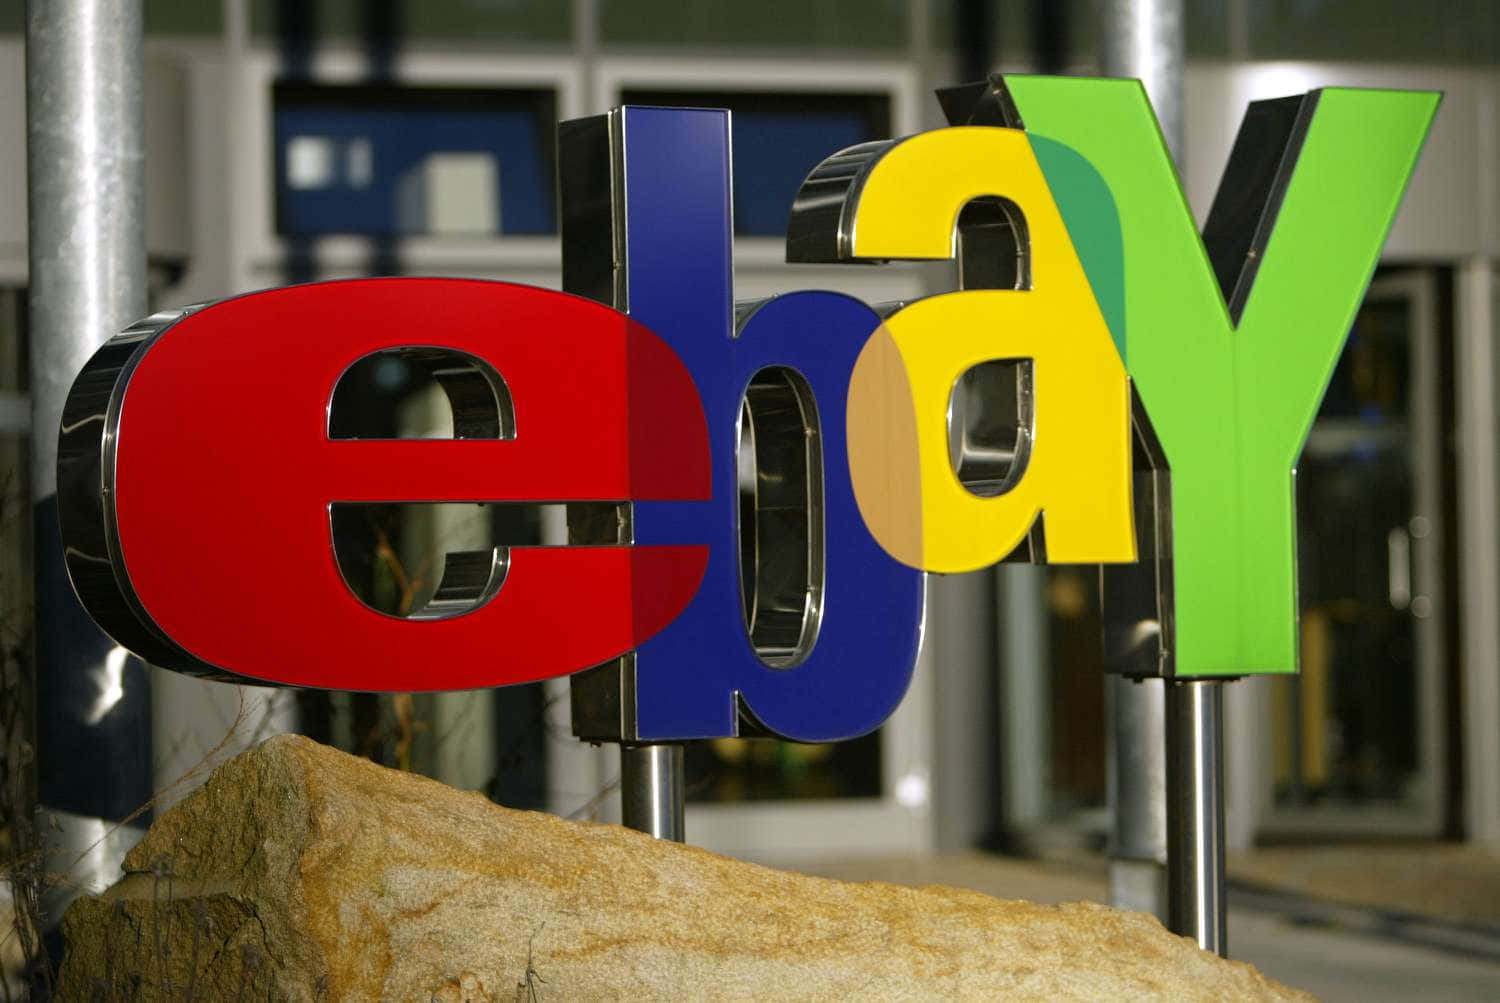 Ebay's Logo Is Seen In Front Of A Building